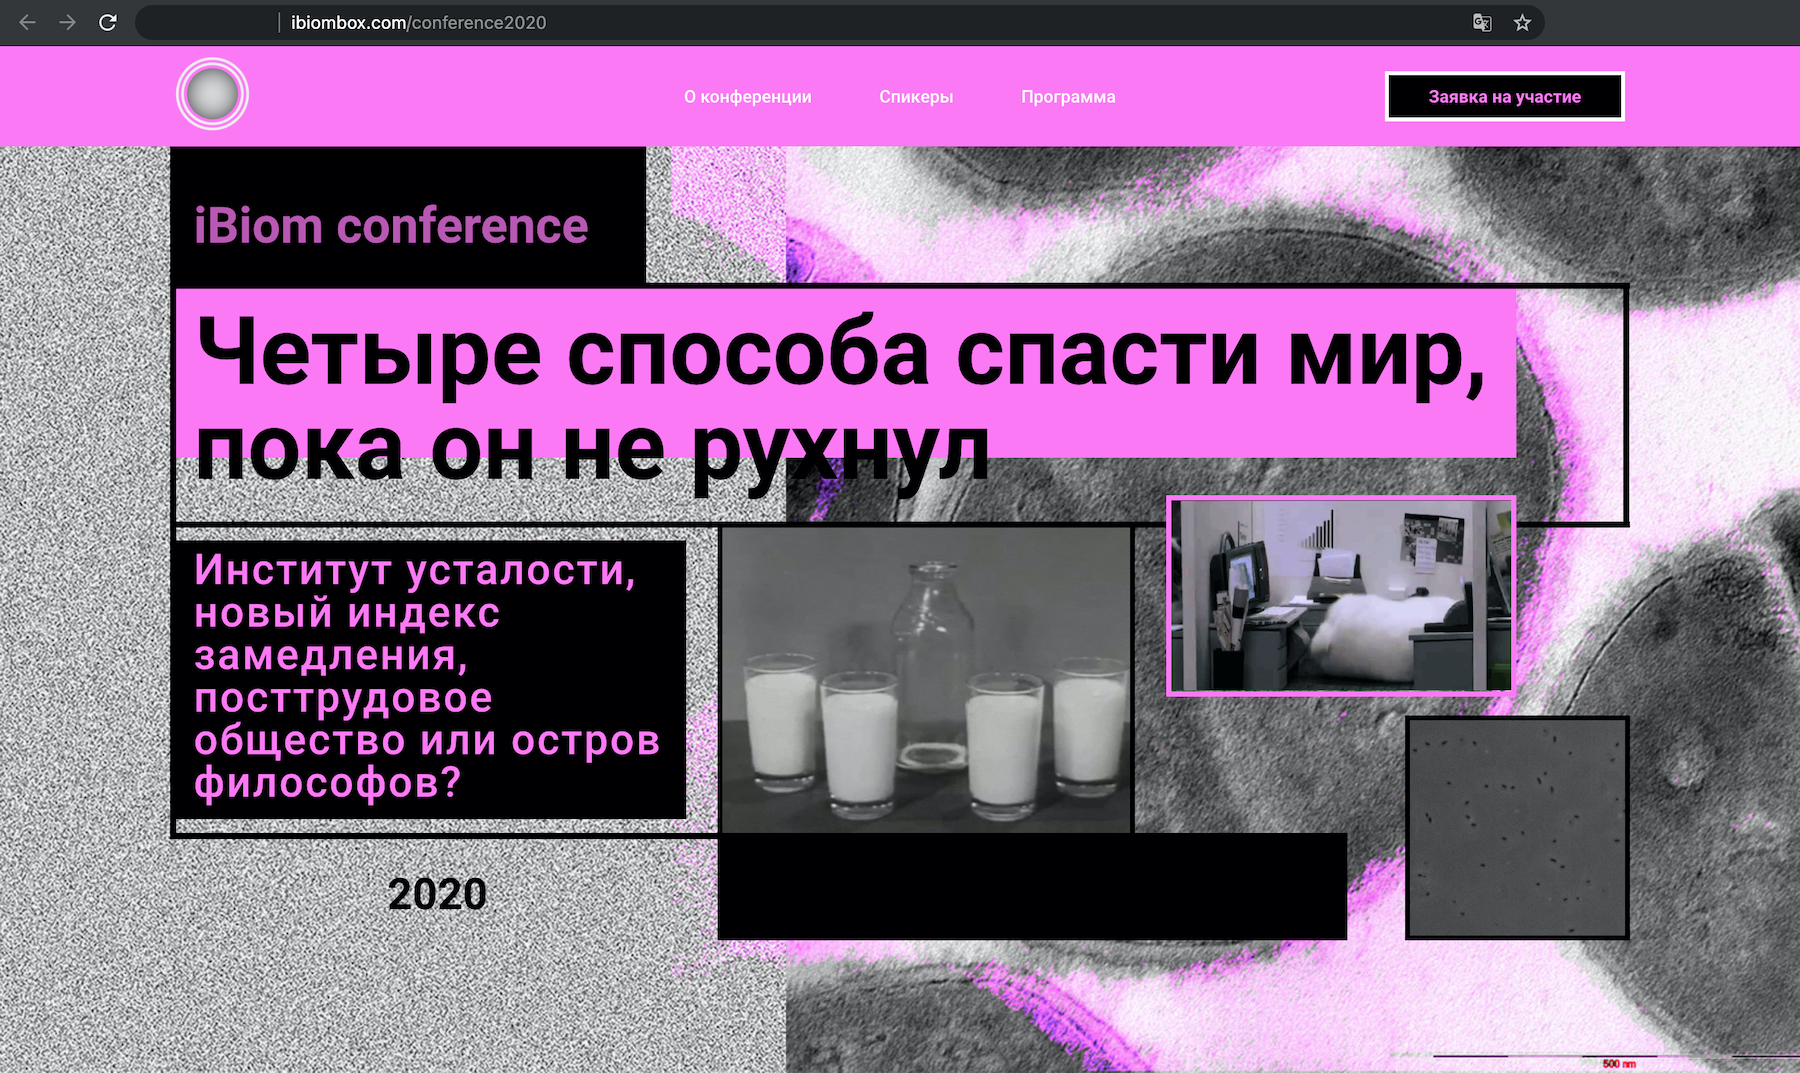 In early 2020, iBiom organised the first Four Ways of Saving the World before It Collapses conference. The conference was accompanied with an educational programme presented on the Blizhe (“Closer”) platform